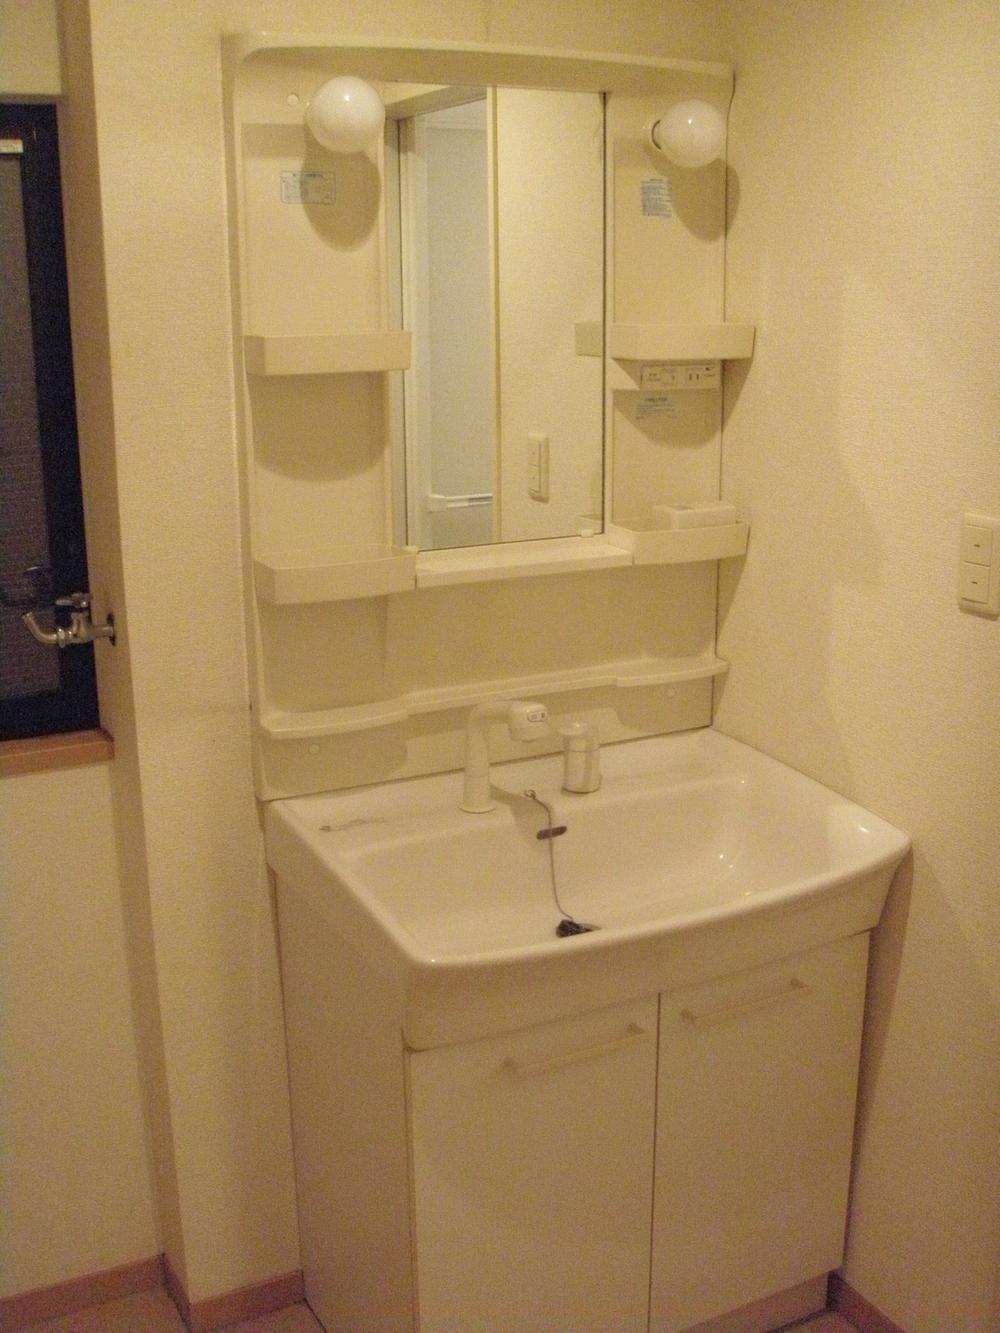 Wash basin, toilet. It is a wash basin with shower head! 